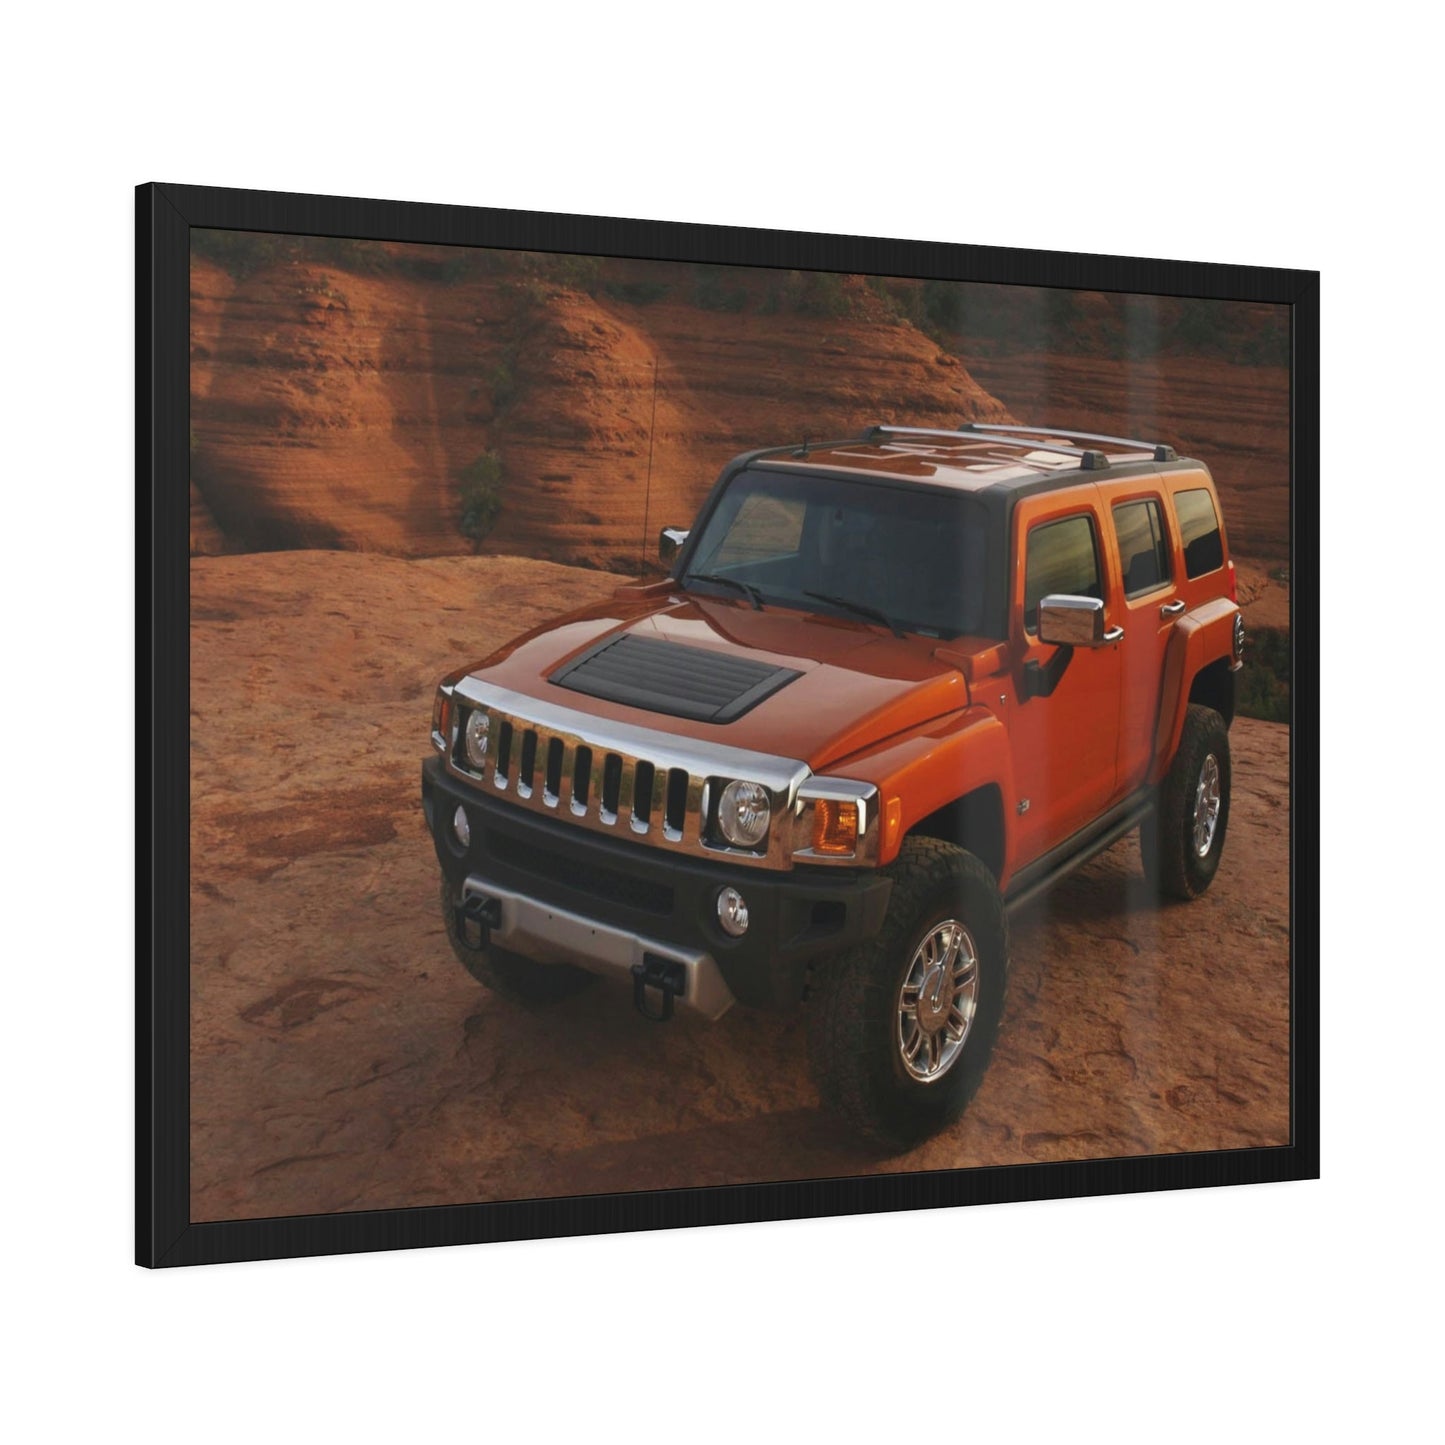 Incredible Machine: A Hummer's Canvas Story